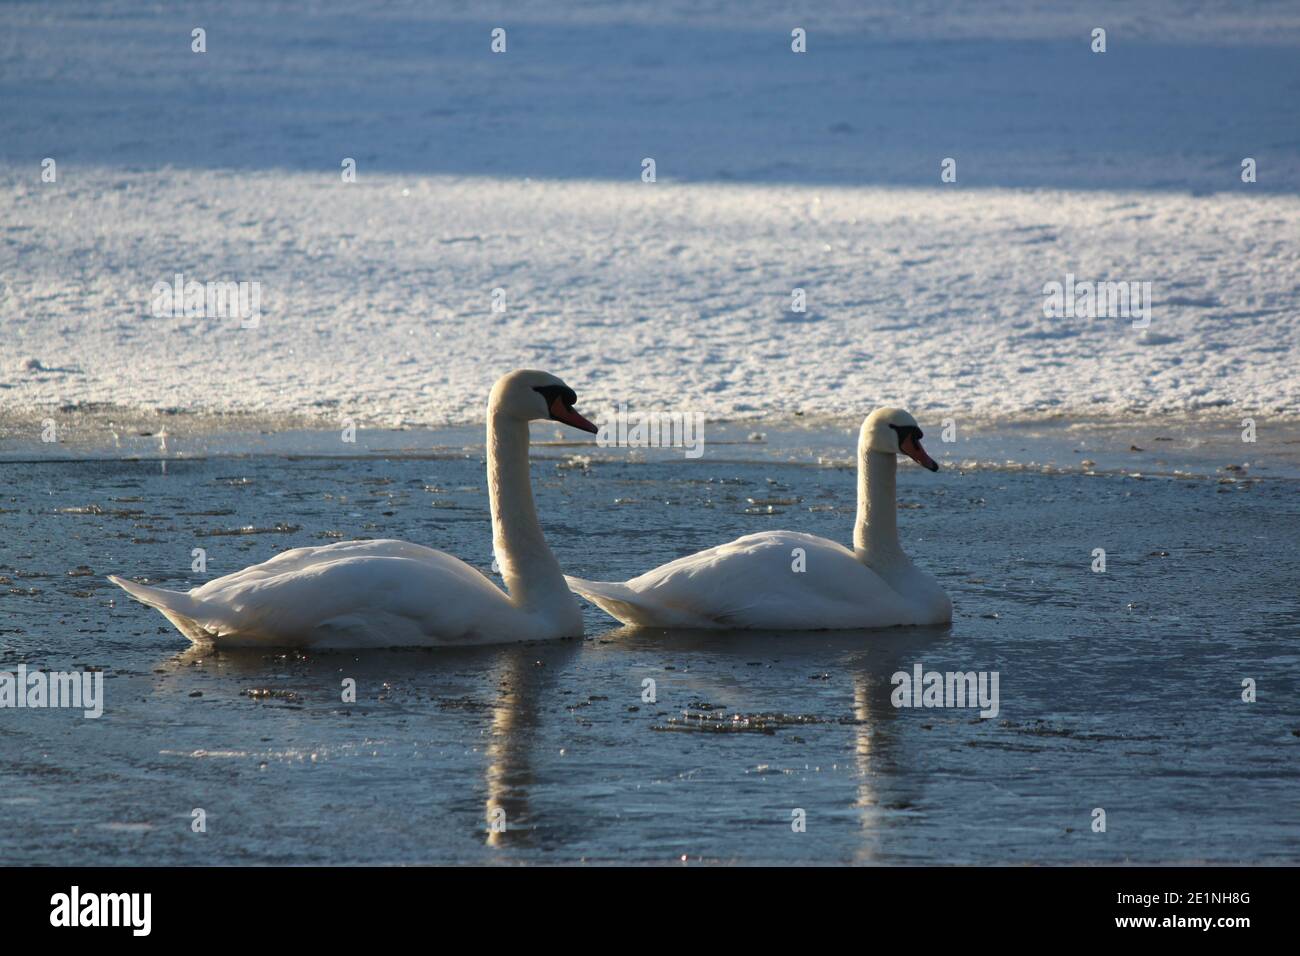 Two white swans swimming in a winter lake. Winter landscapes, winter parks in Scotland. Wildlife and winter time. Stock Photo